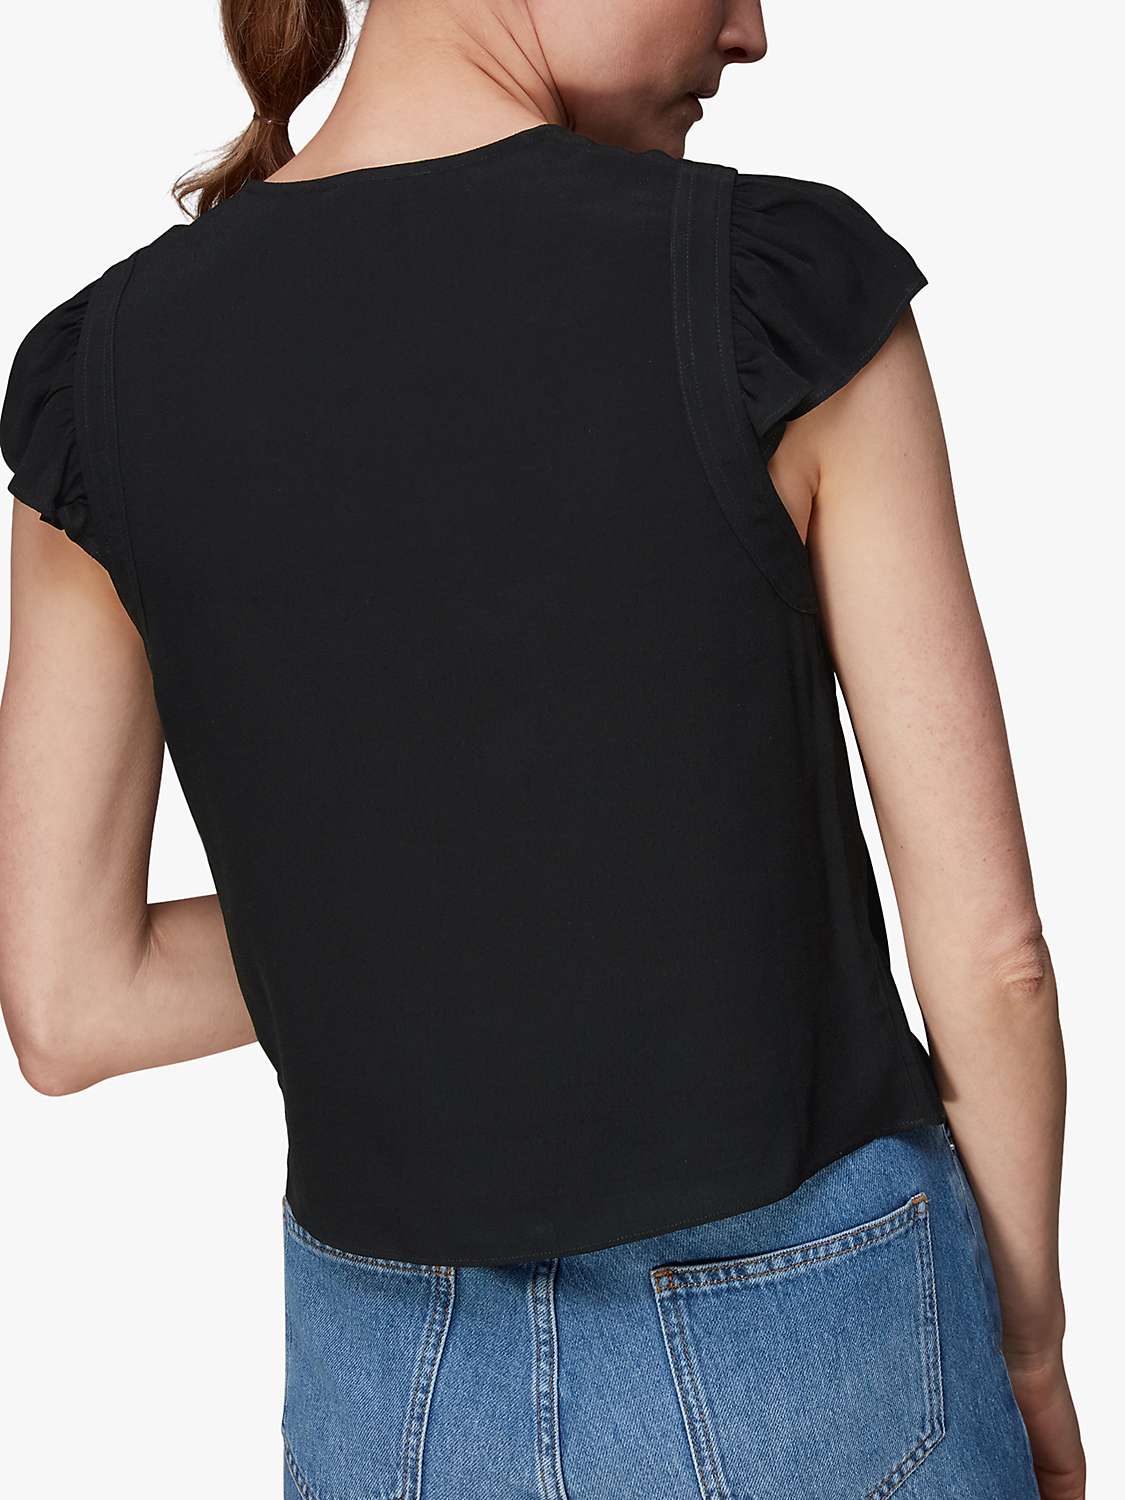 Whistles Frill Sleeve Top, Black at John Lewis & Partners